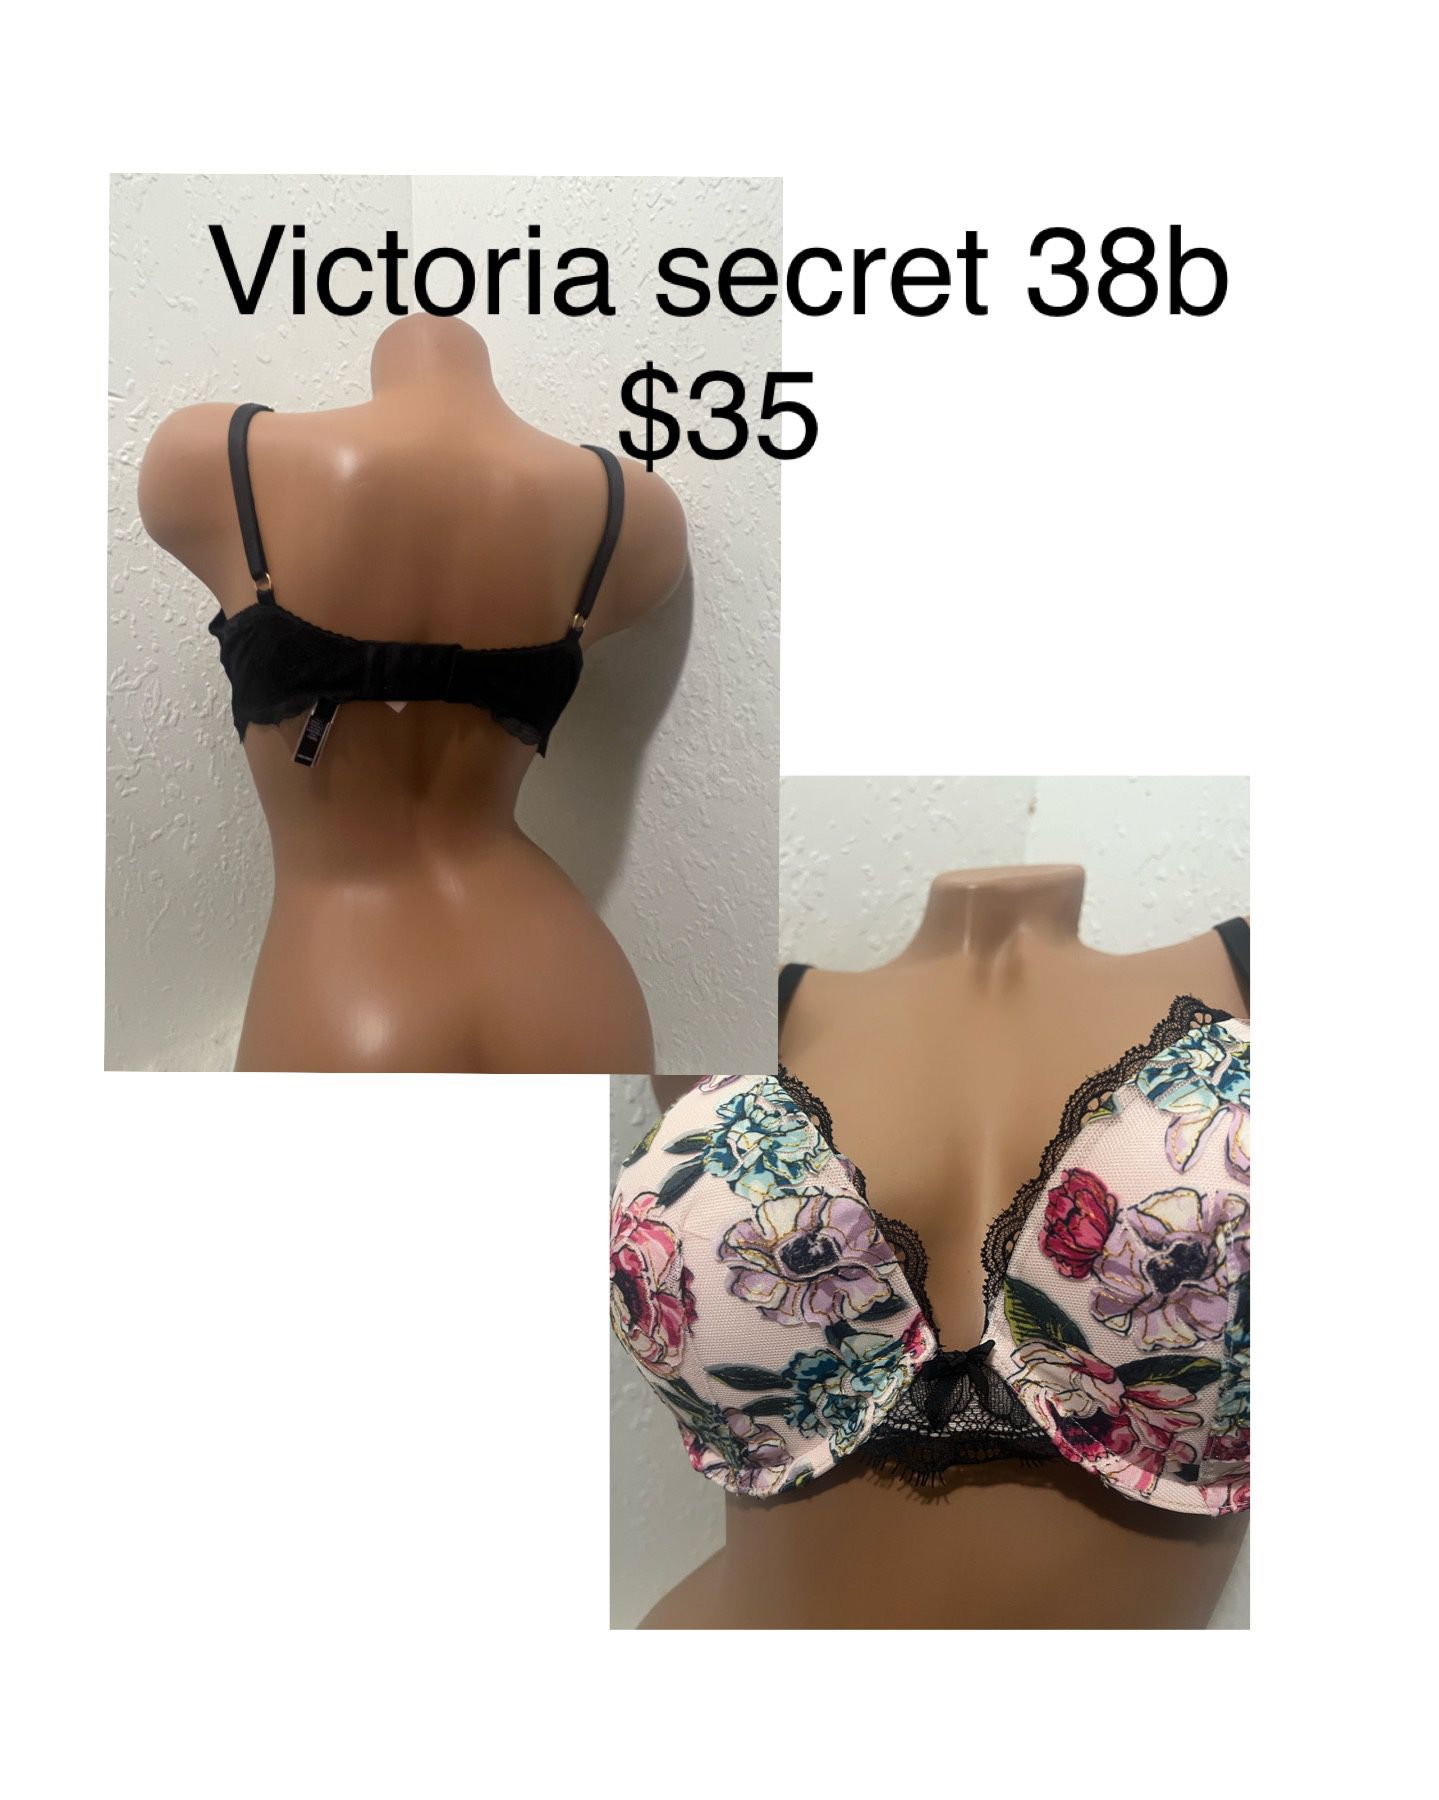 New Bra Victoria Secret 38b Push Up firm Price No Offers for Sale